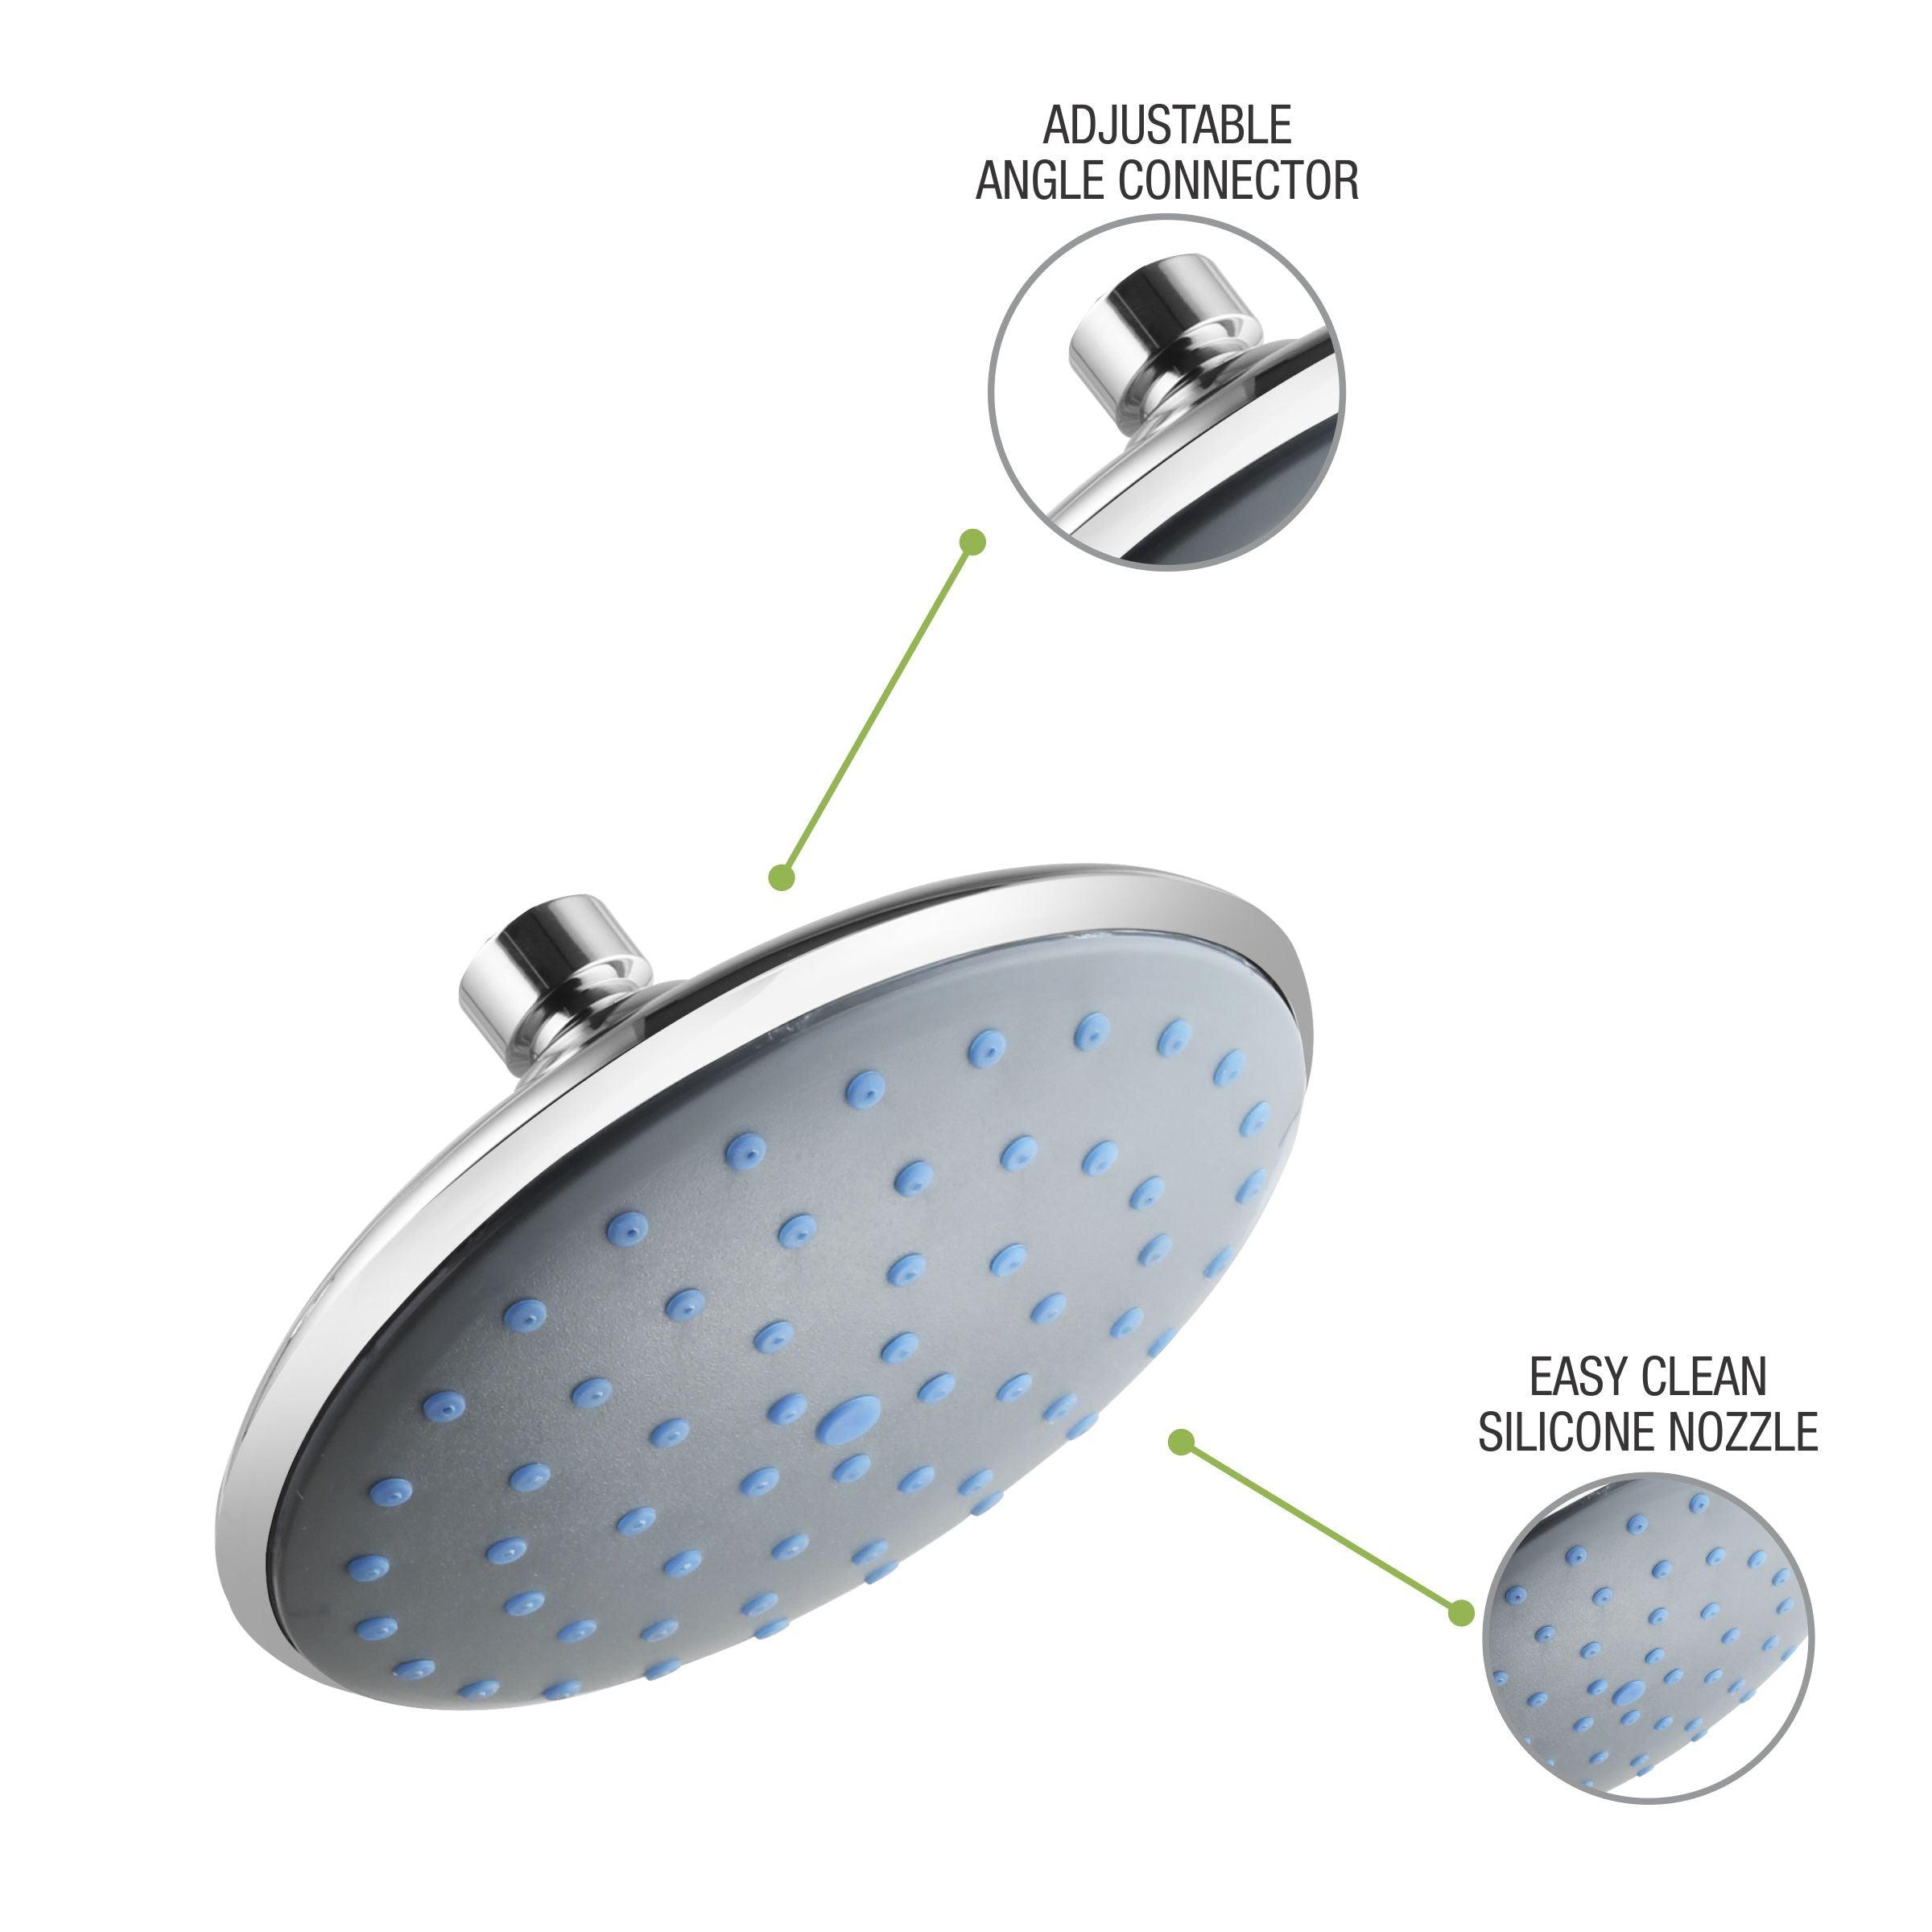 Rapid Overhead Shower (6 Inches) features